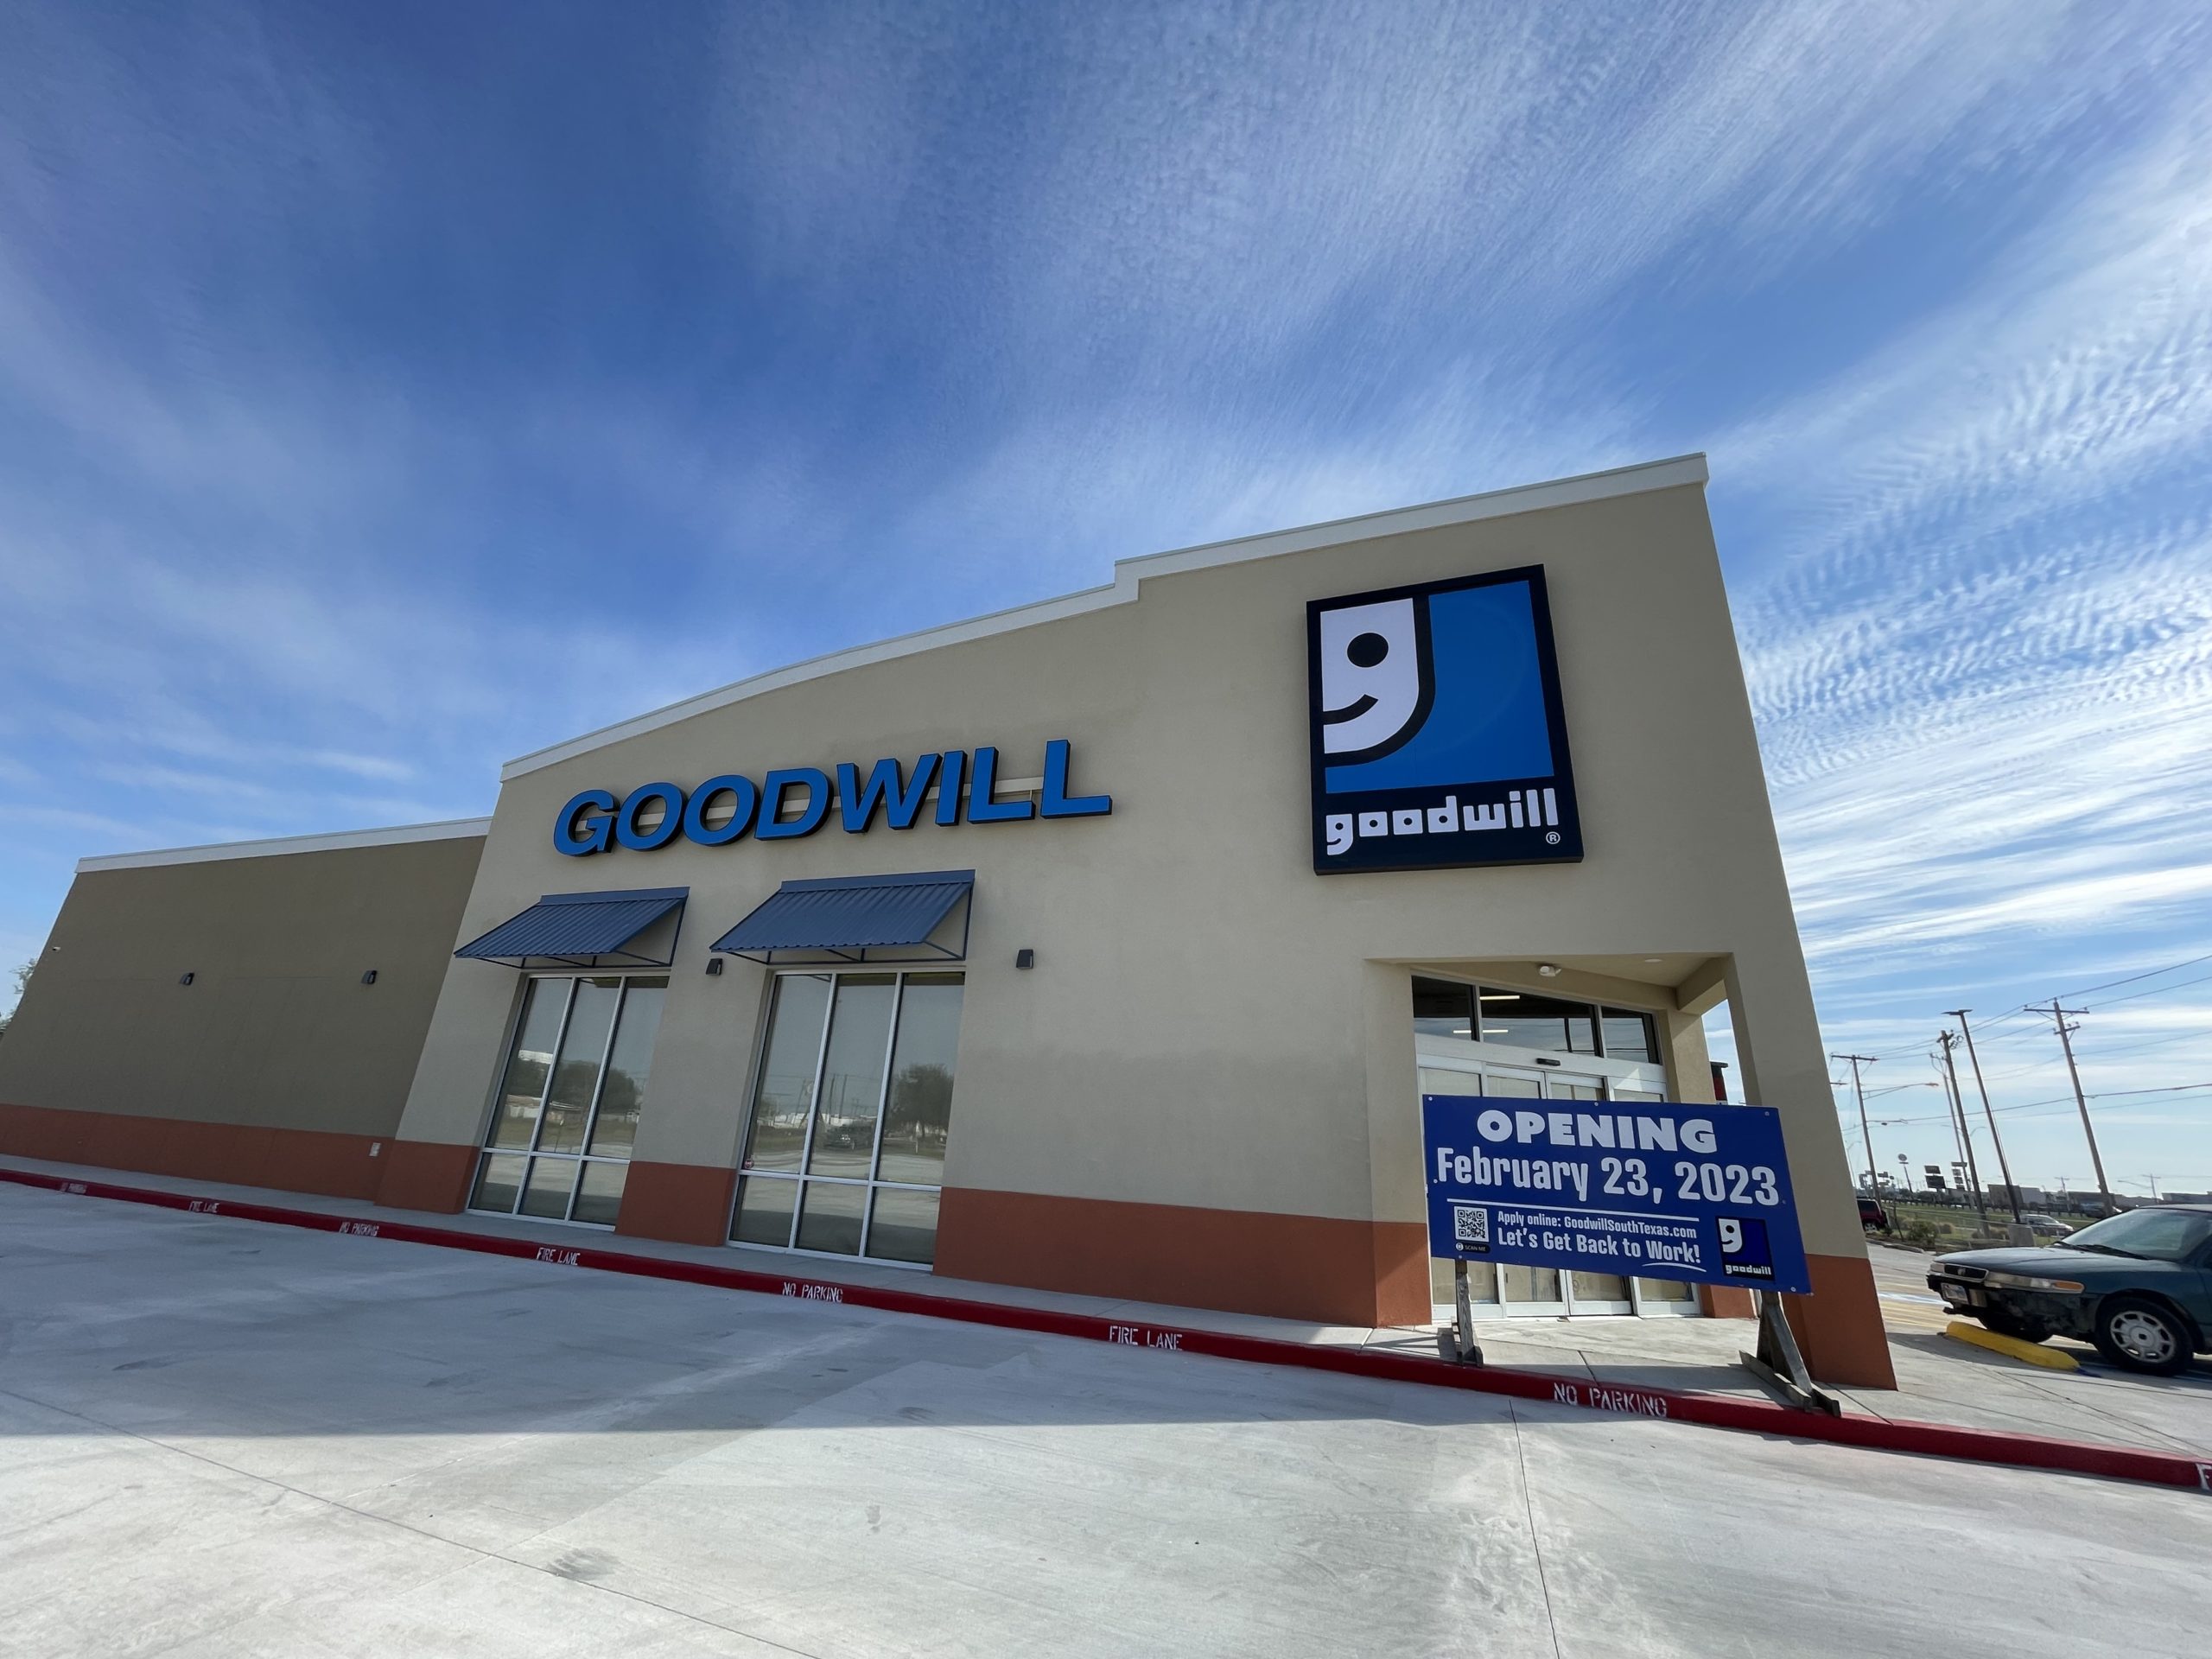 bad companies - sky - Goodwill Fic Le 9 gaaduill Opening at's et Back to Wyck